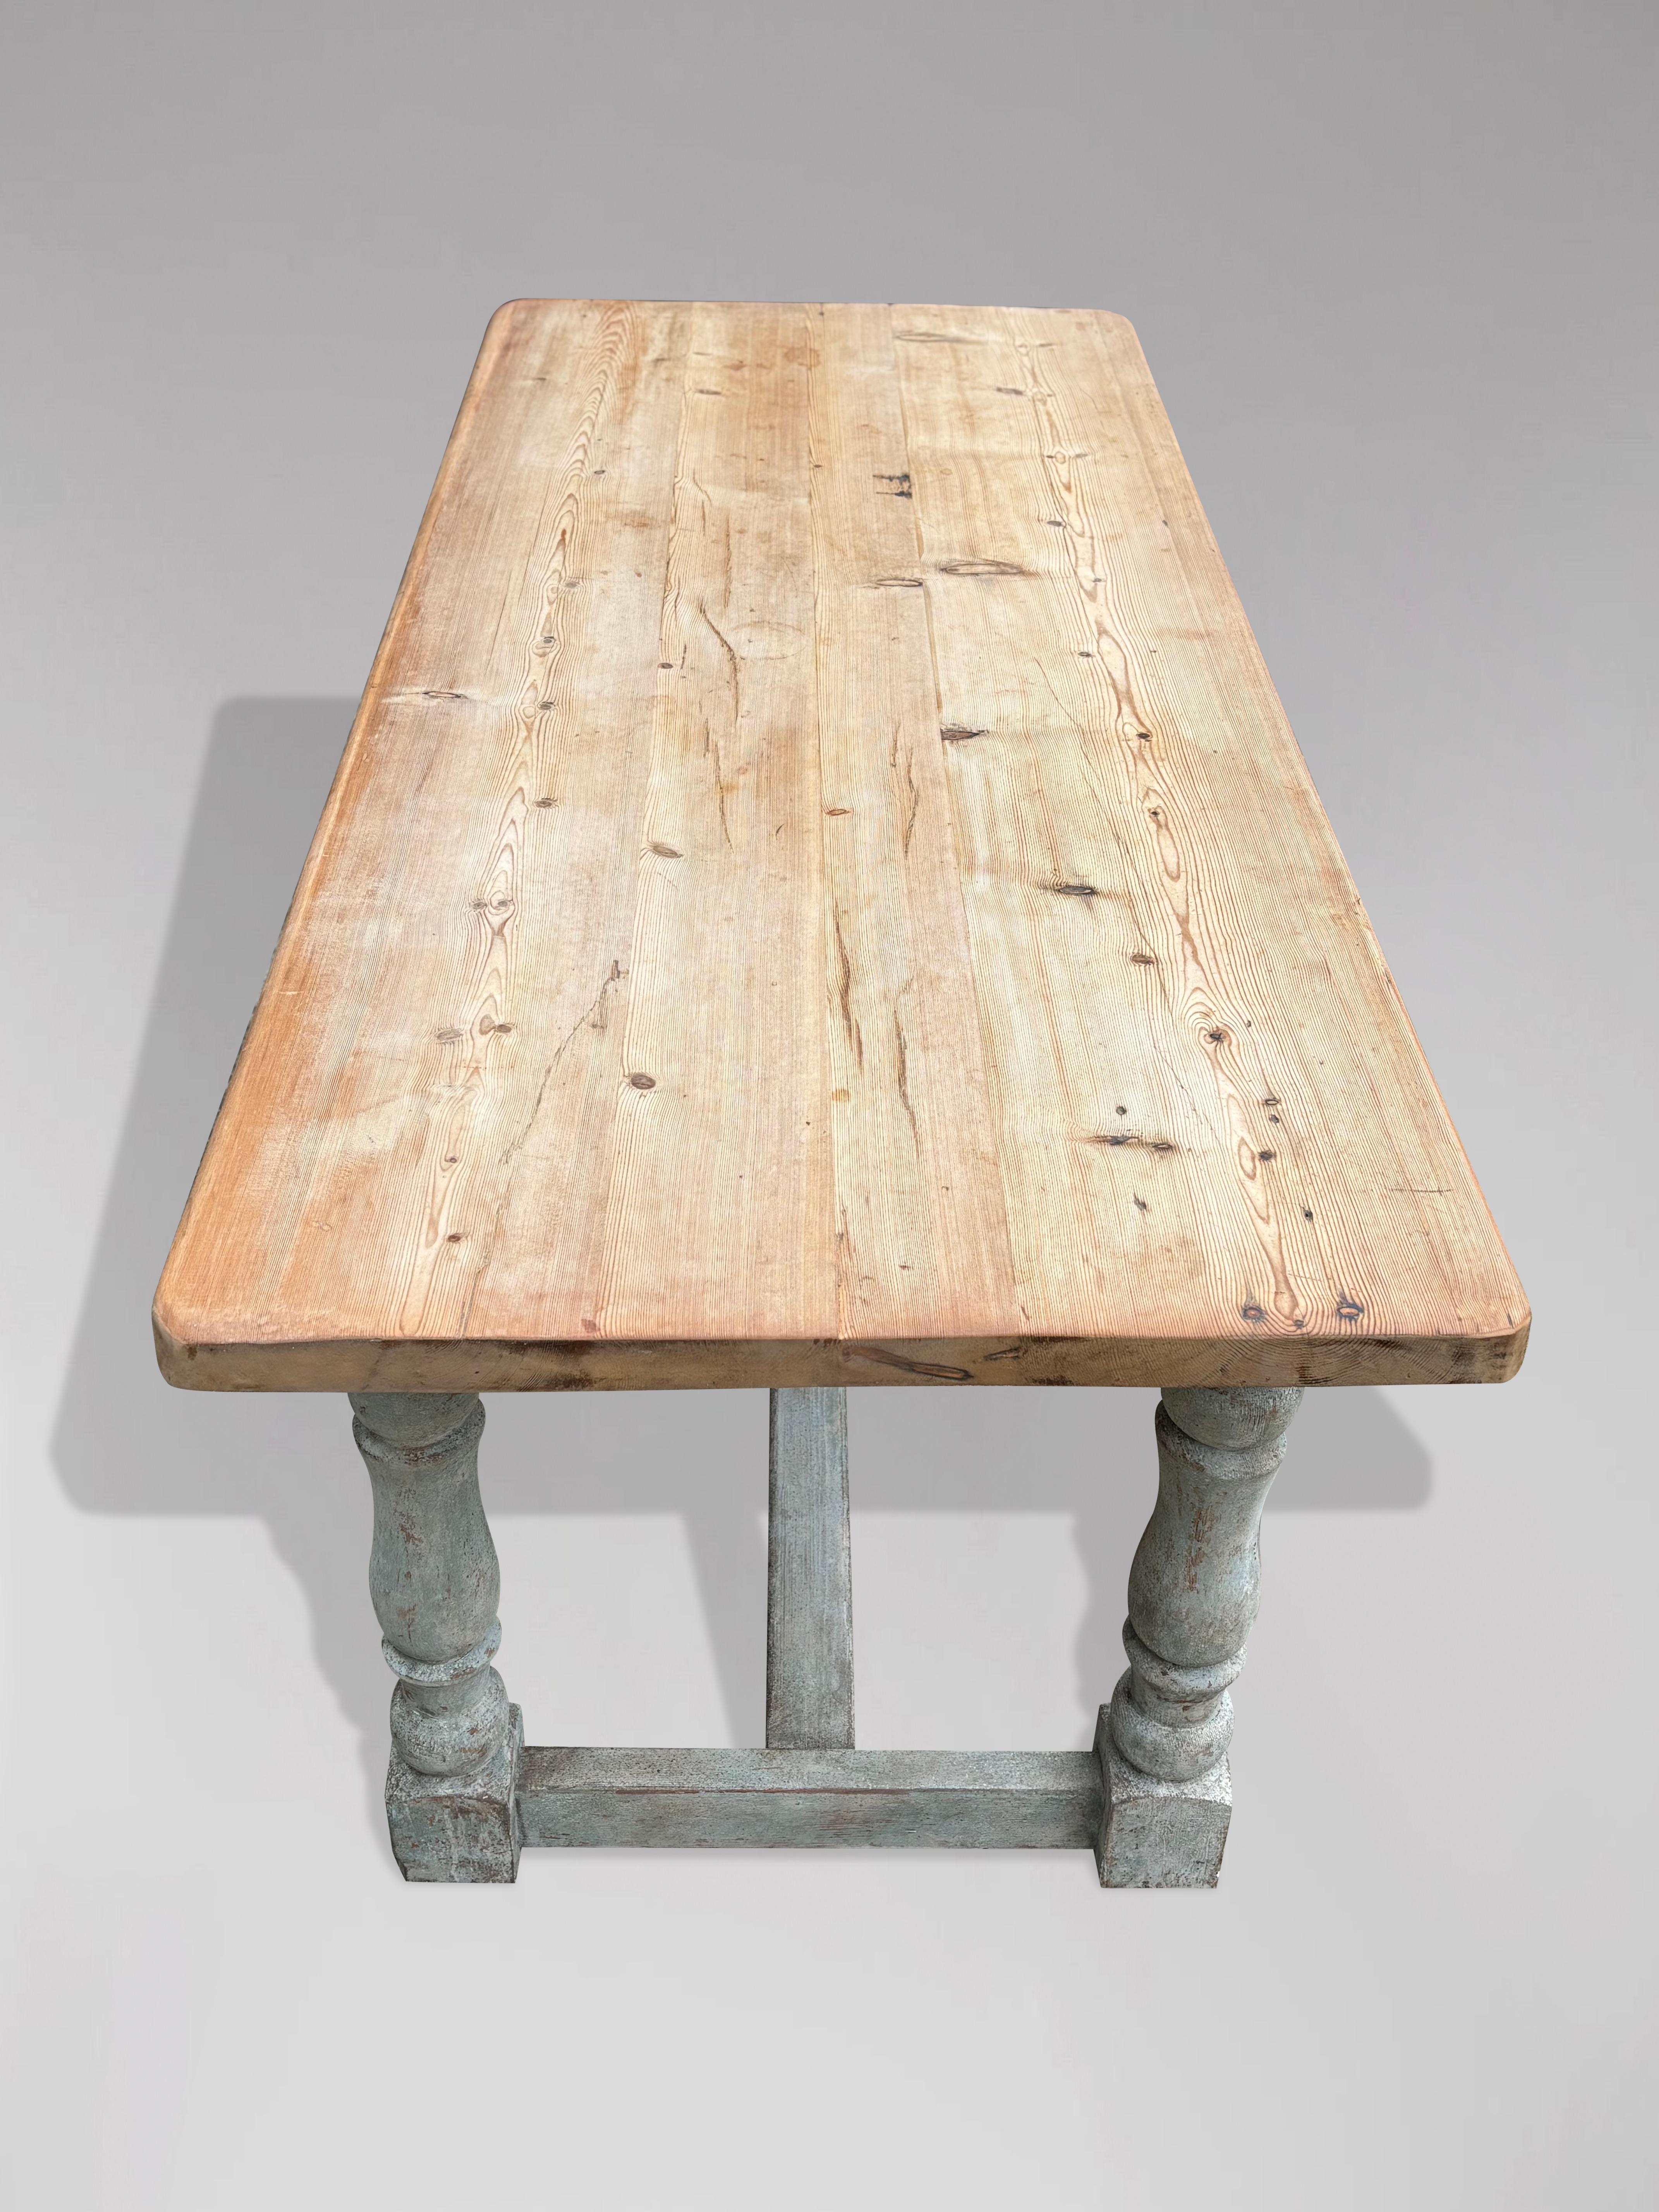 19th Century Victorian Period Pine Scrub Top Farmhouse Dining Table In Good Condition For Sale In Petworth,West Sussex, GB